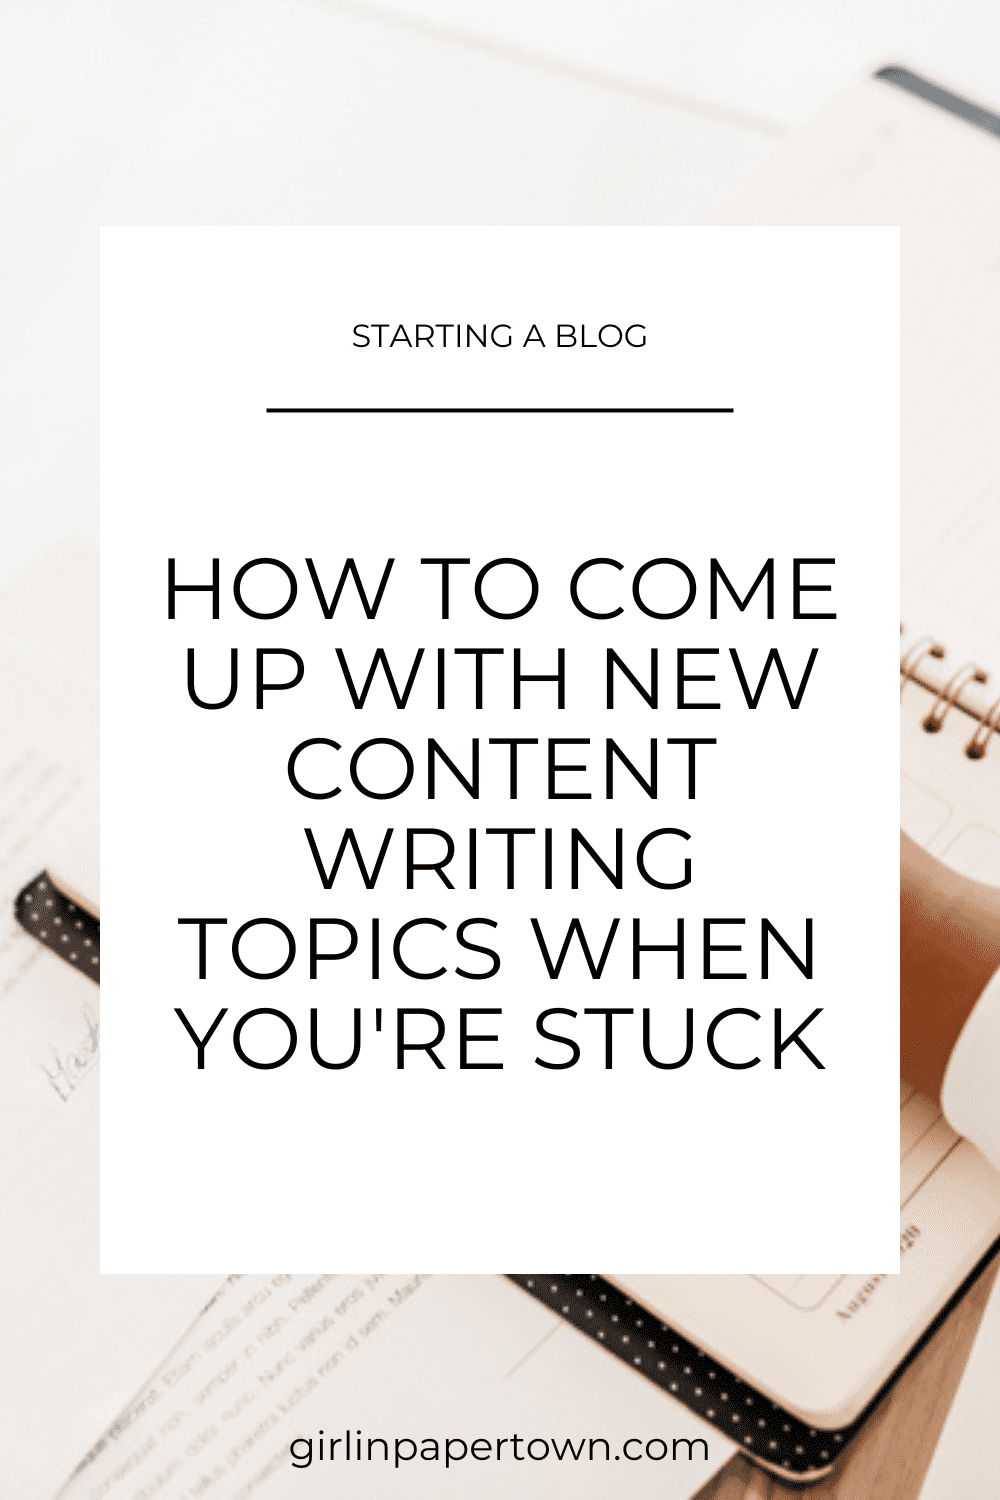 Starting a blog: How to come up with new content writing topics when you're stuck